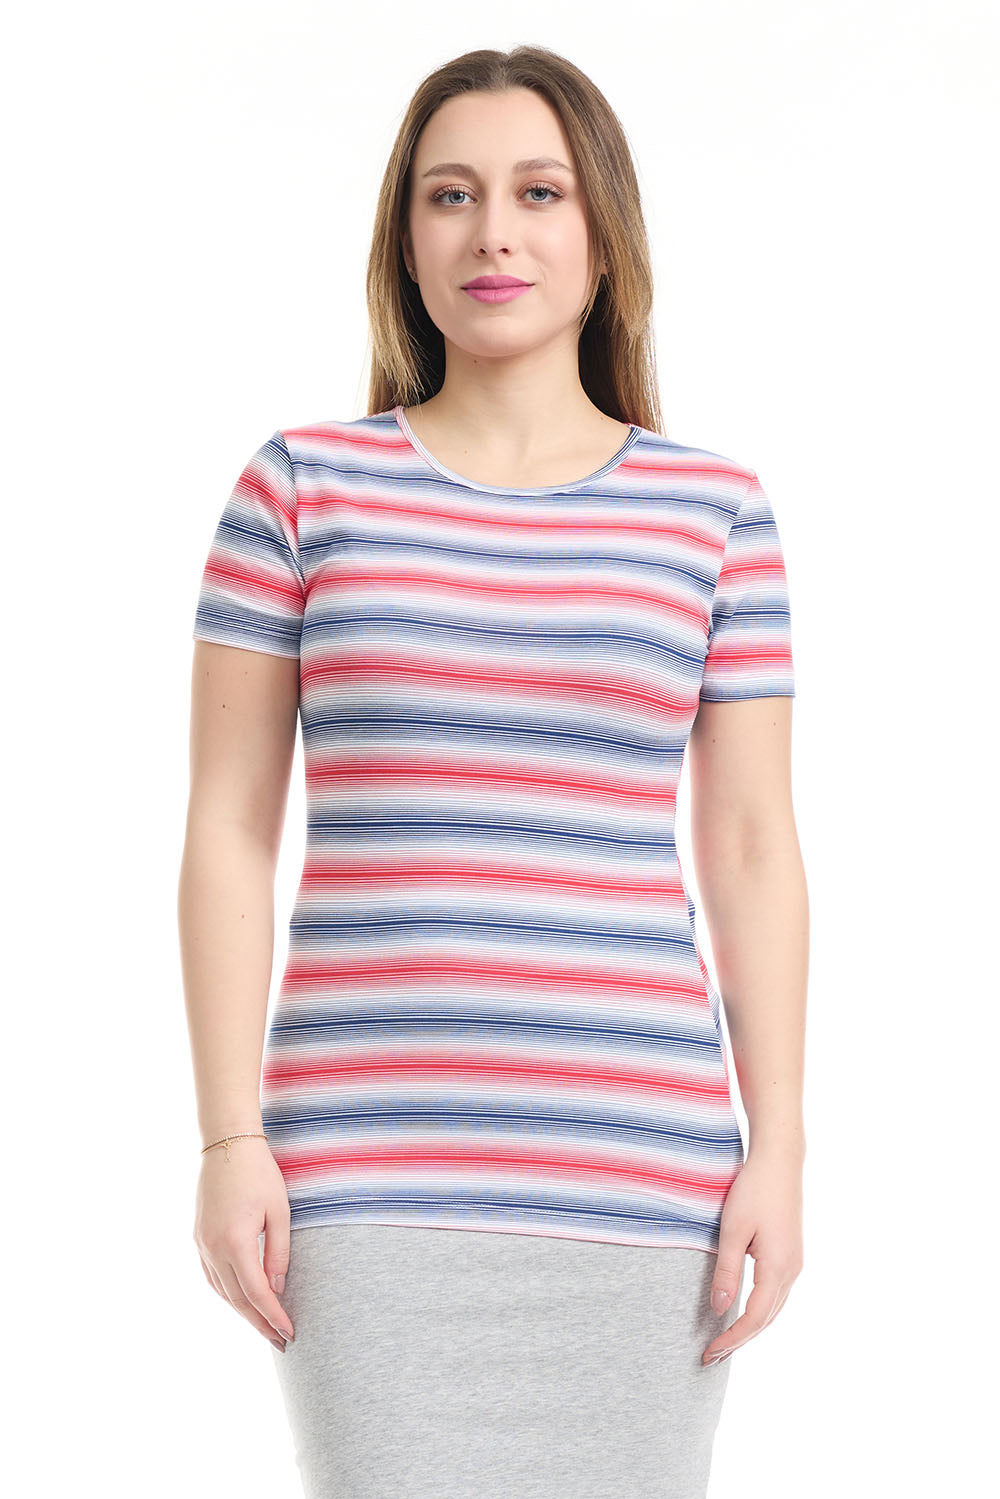 cotton tee with red white and blue stripes